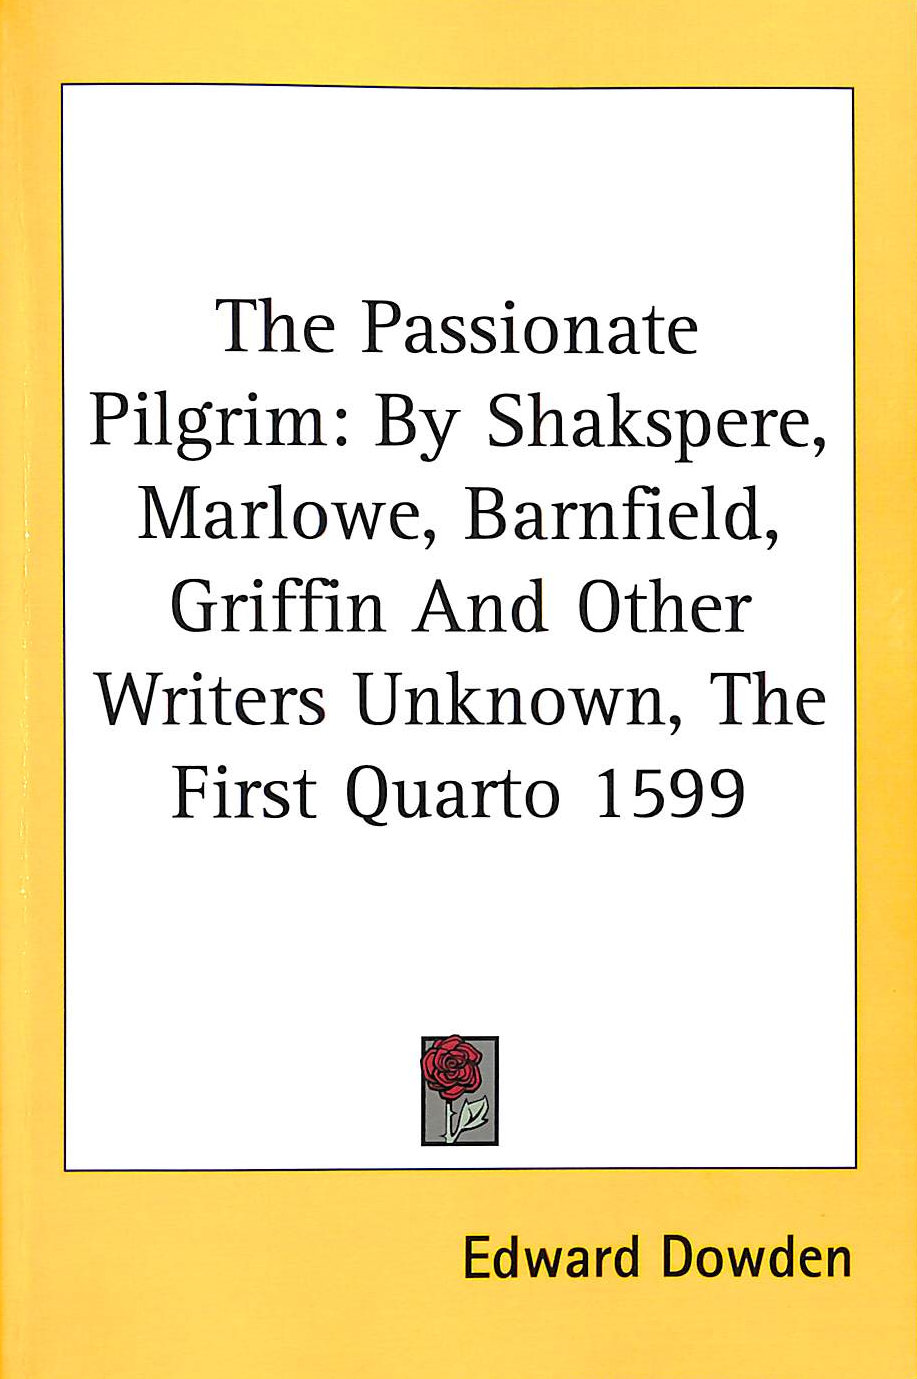 SHAKESPEARE, W. MARLOWE P, BARNFIELD. GRIFFIN - The Passionate Pilgrim: By Shakspere, Marlowe, Barnfield, Griffin And Other Writers Unknown, The First Quarto 1599